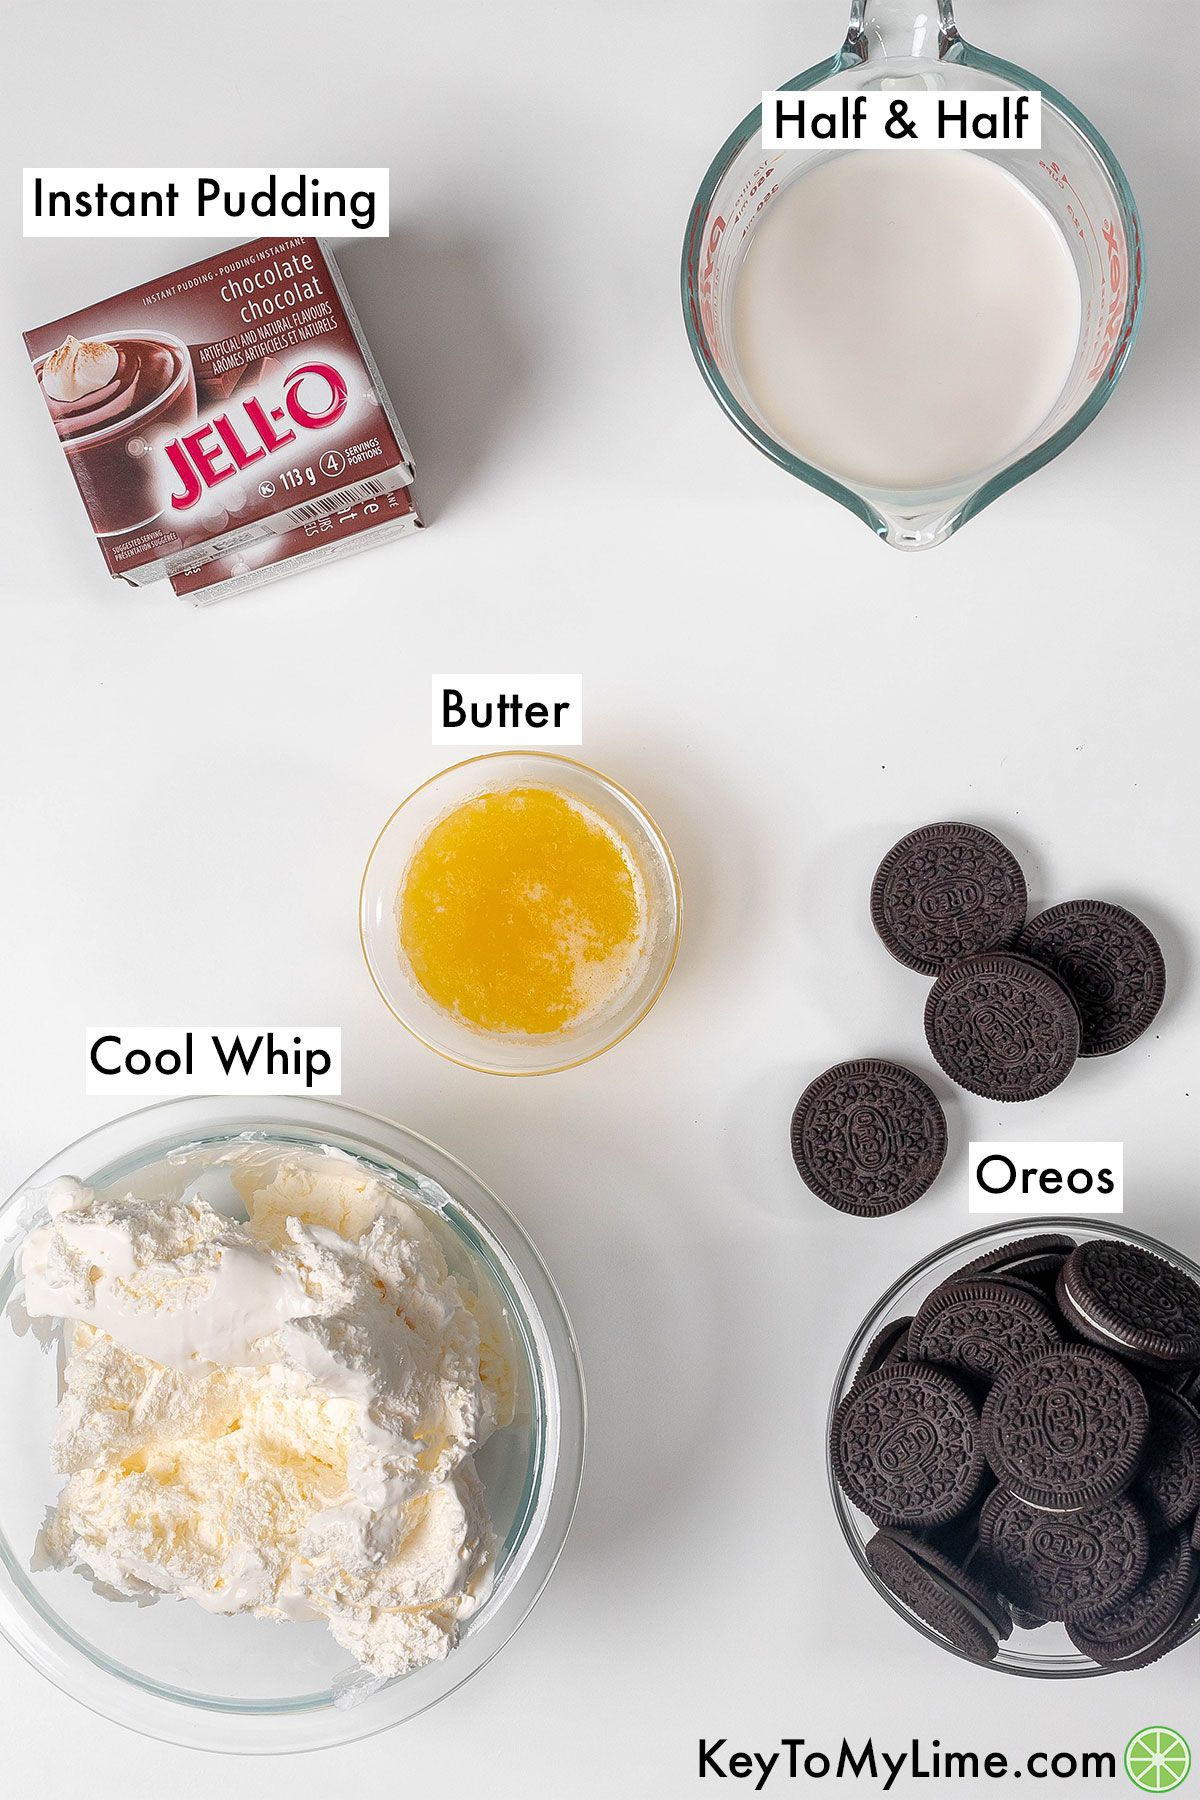 The labeled ingredients for chocolate jelly pudding cake.